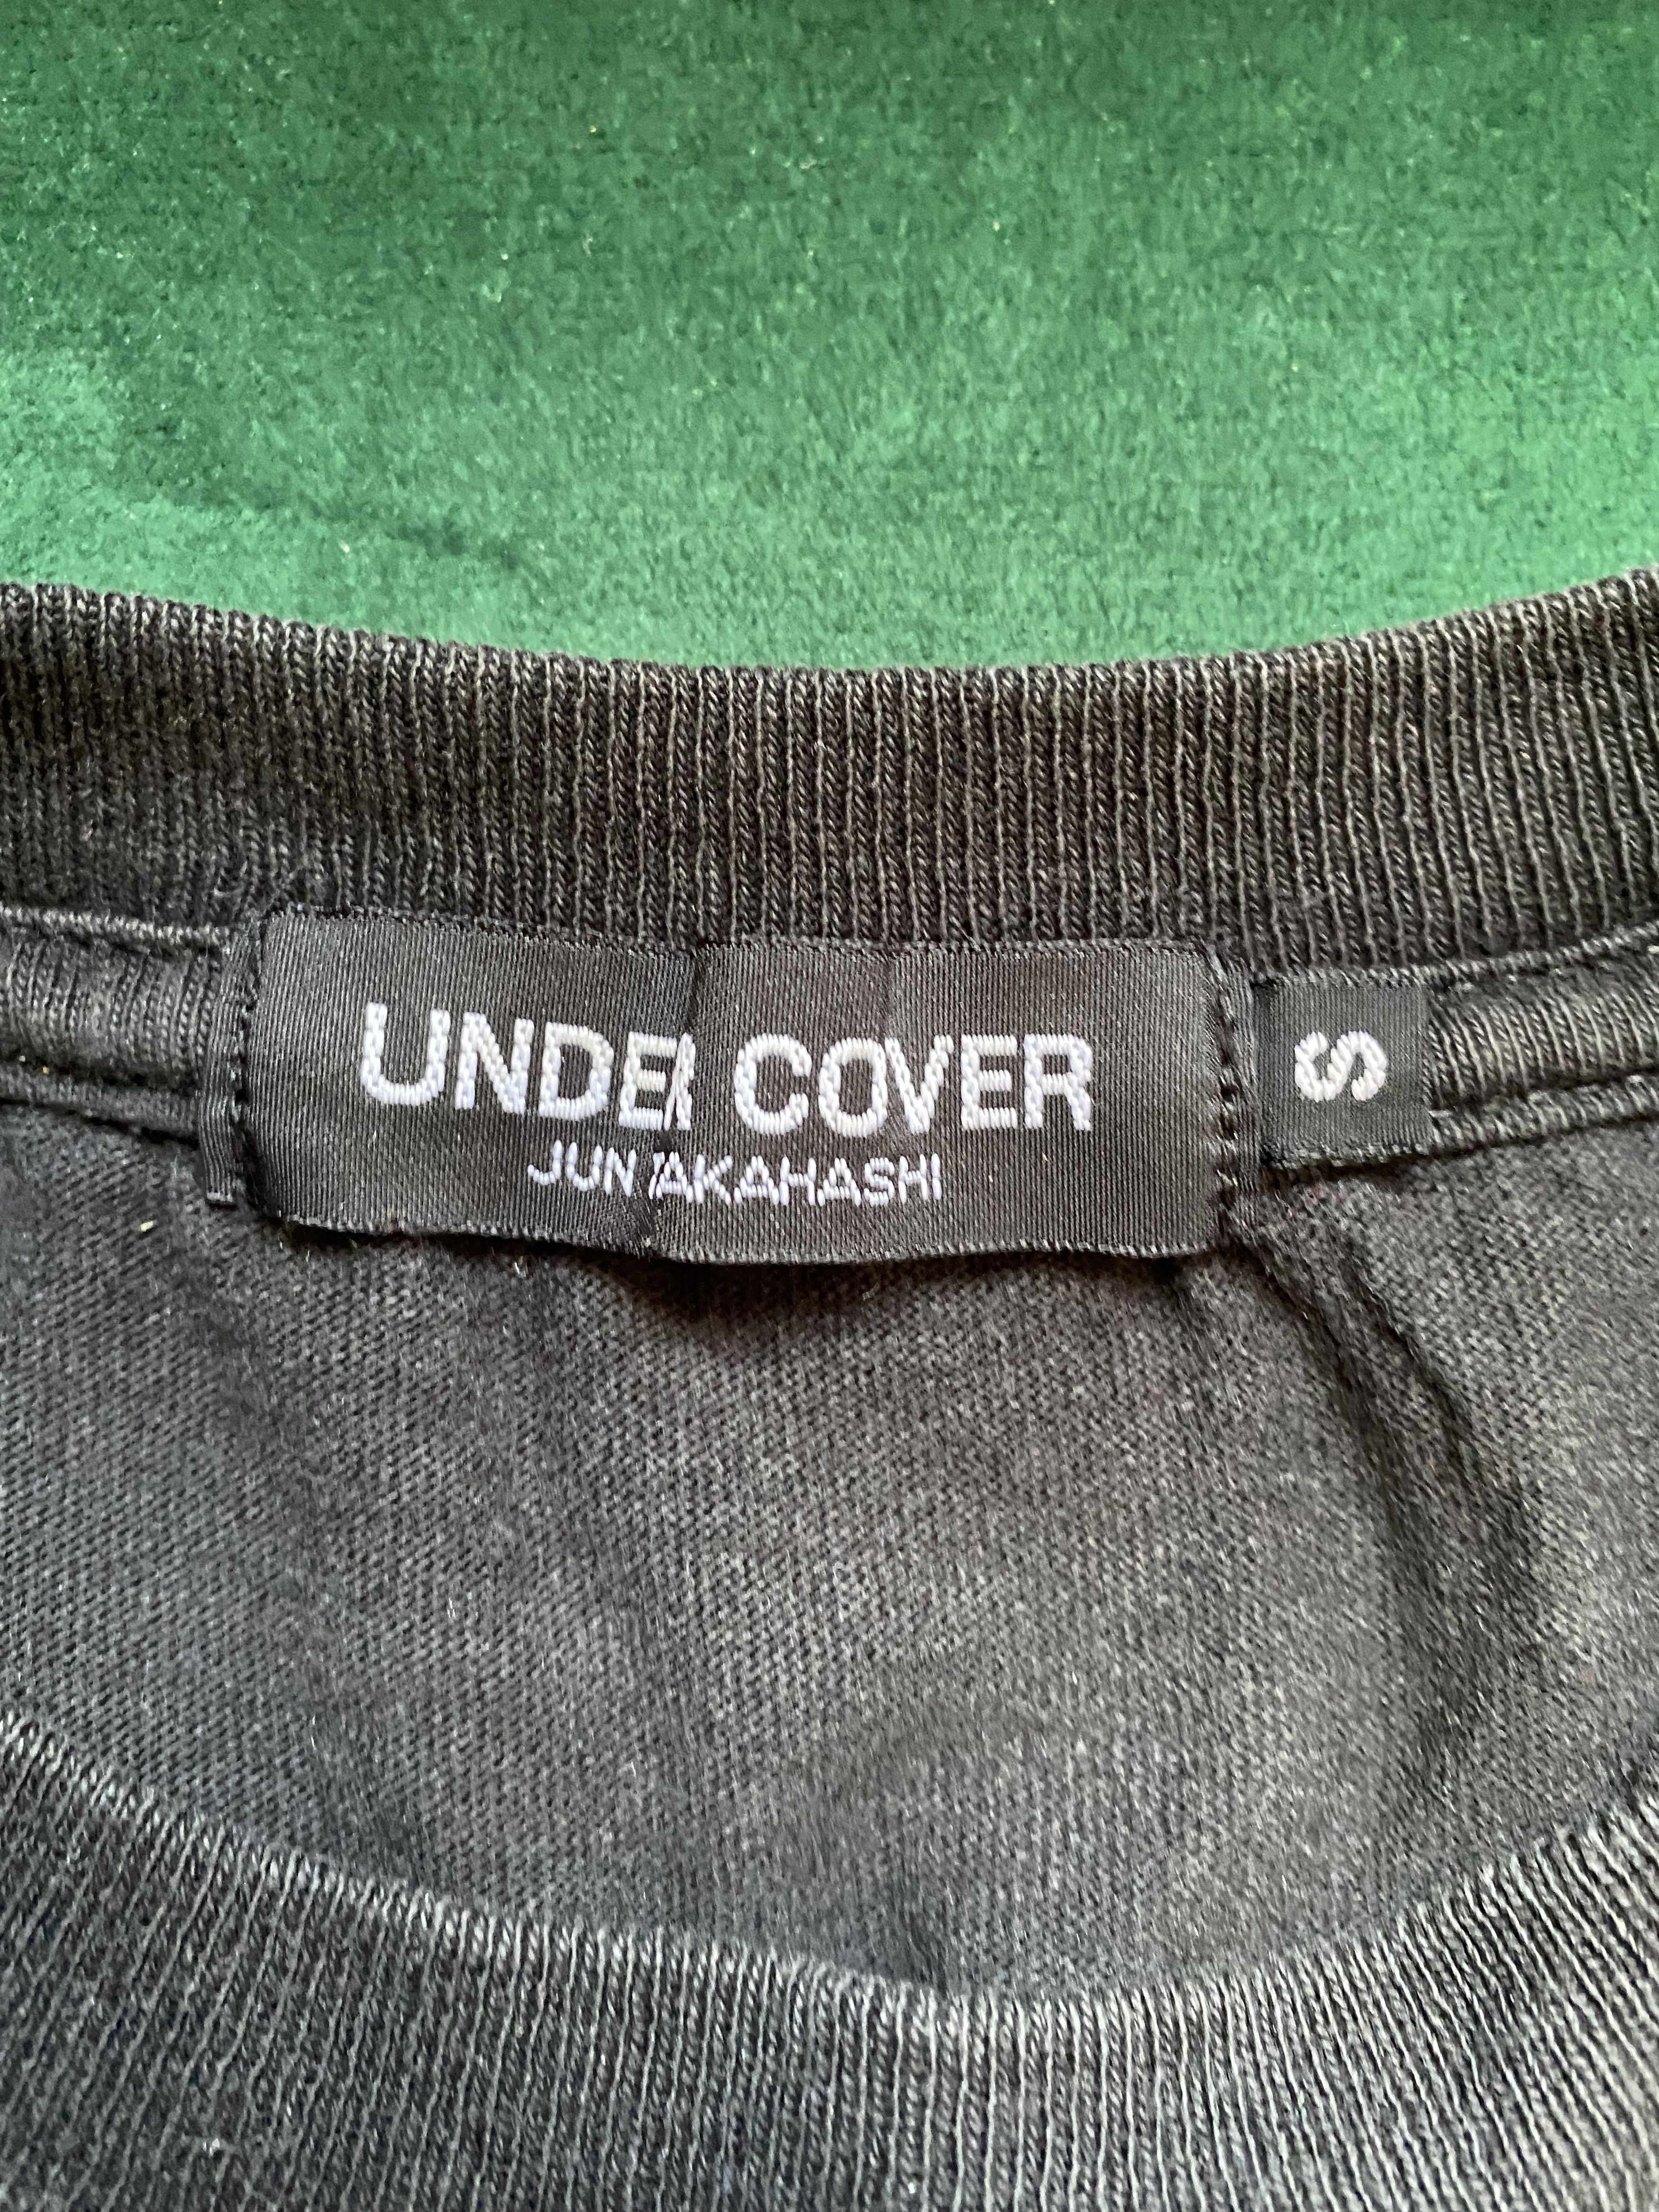 Undercover SS08 Summer Madness Tee in Black Size US S / EU 44-46 / 1 - 4 Preview